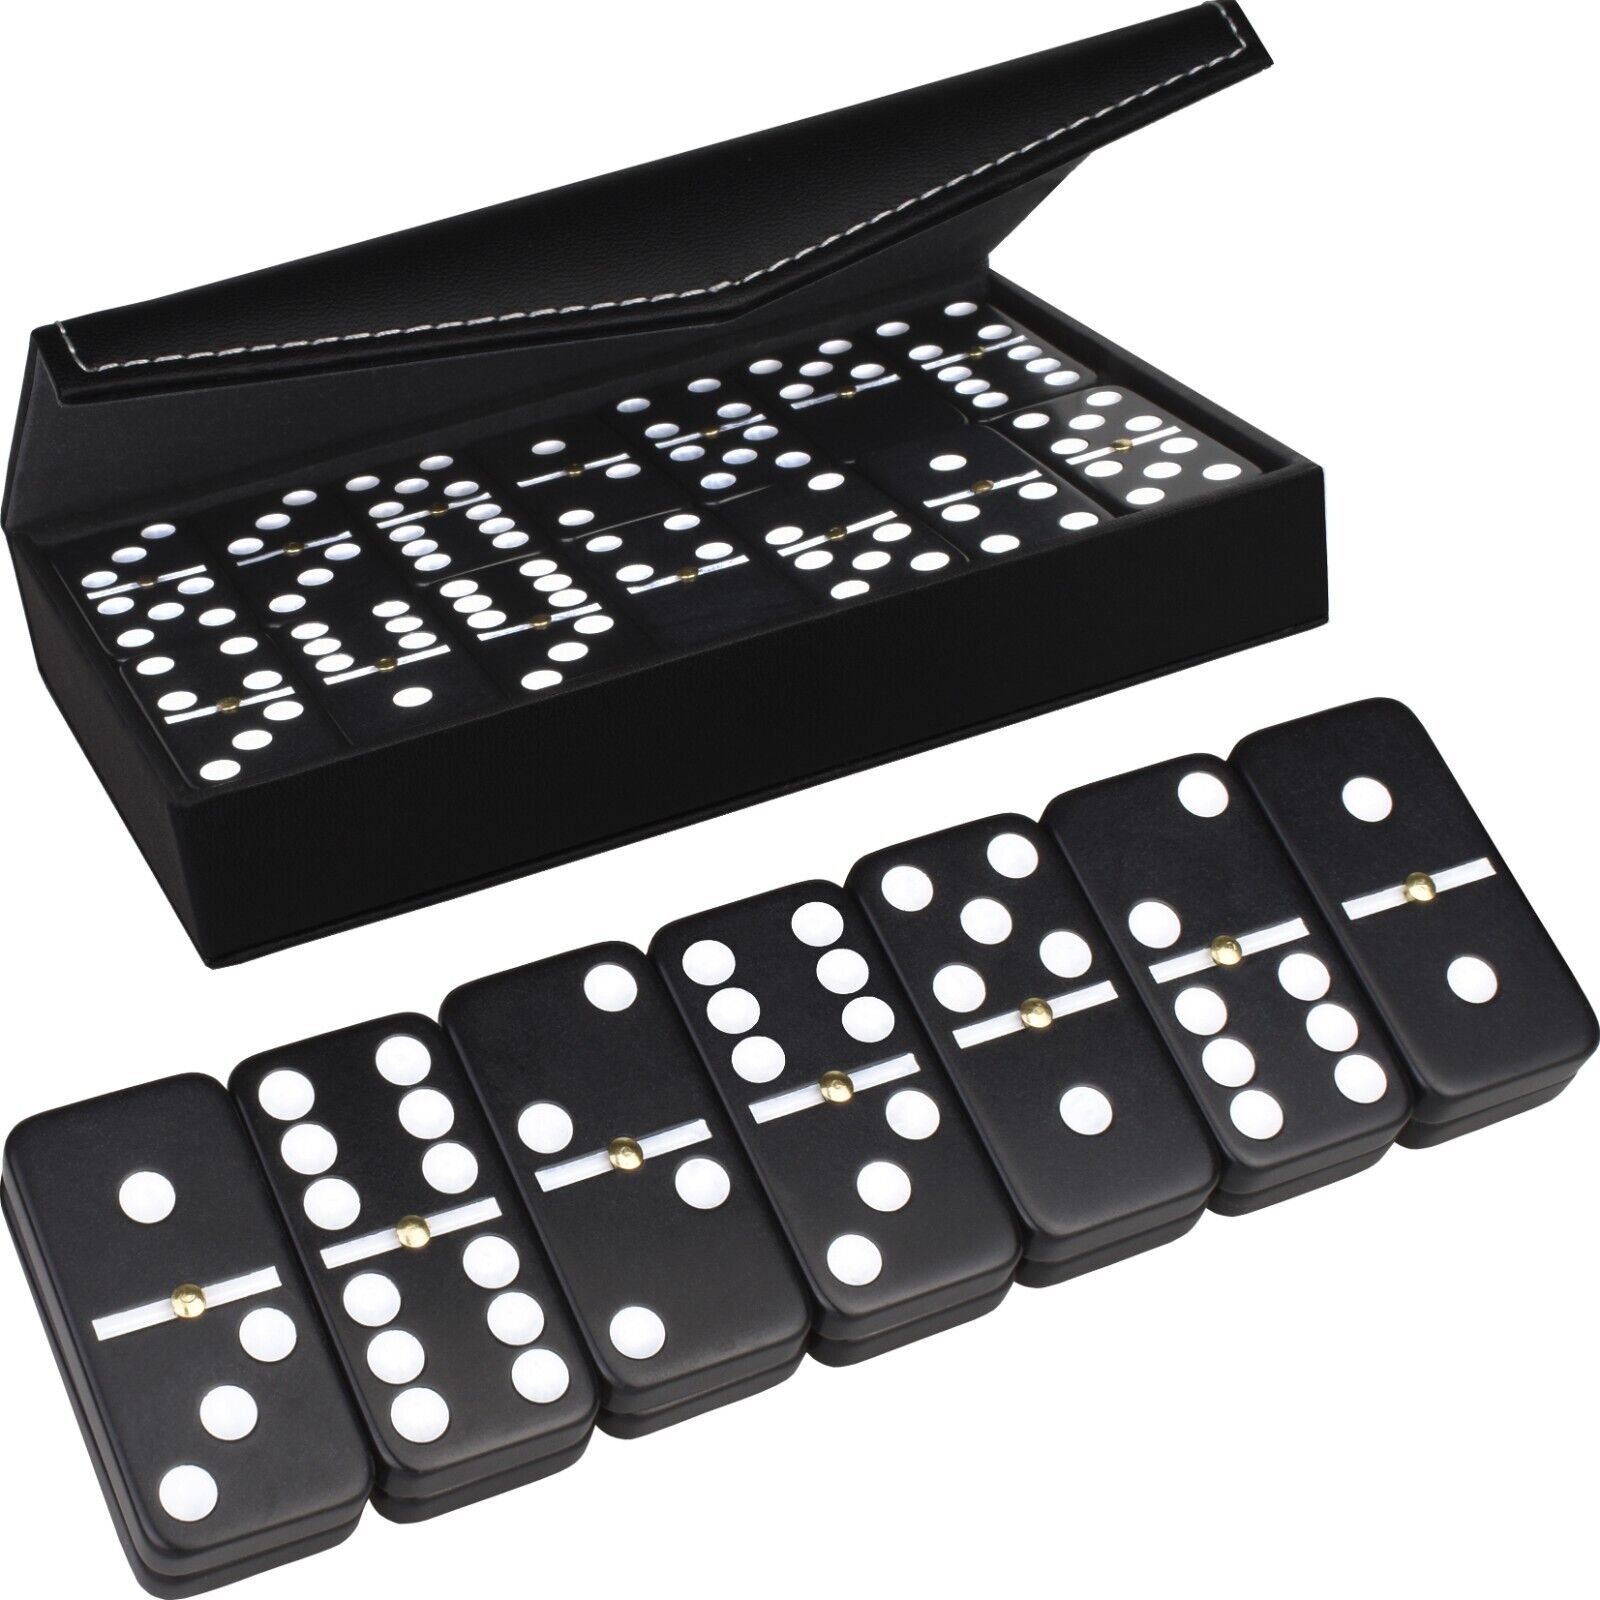 Dominoes Set for Adults - Dominoes Double 6 Set 28 Tiles with Black Leather Case